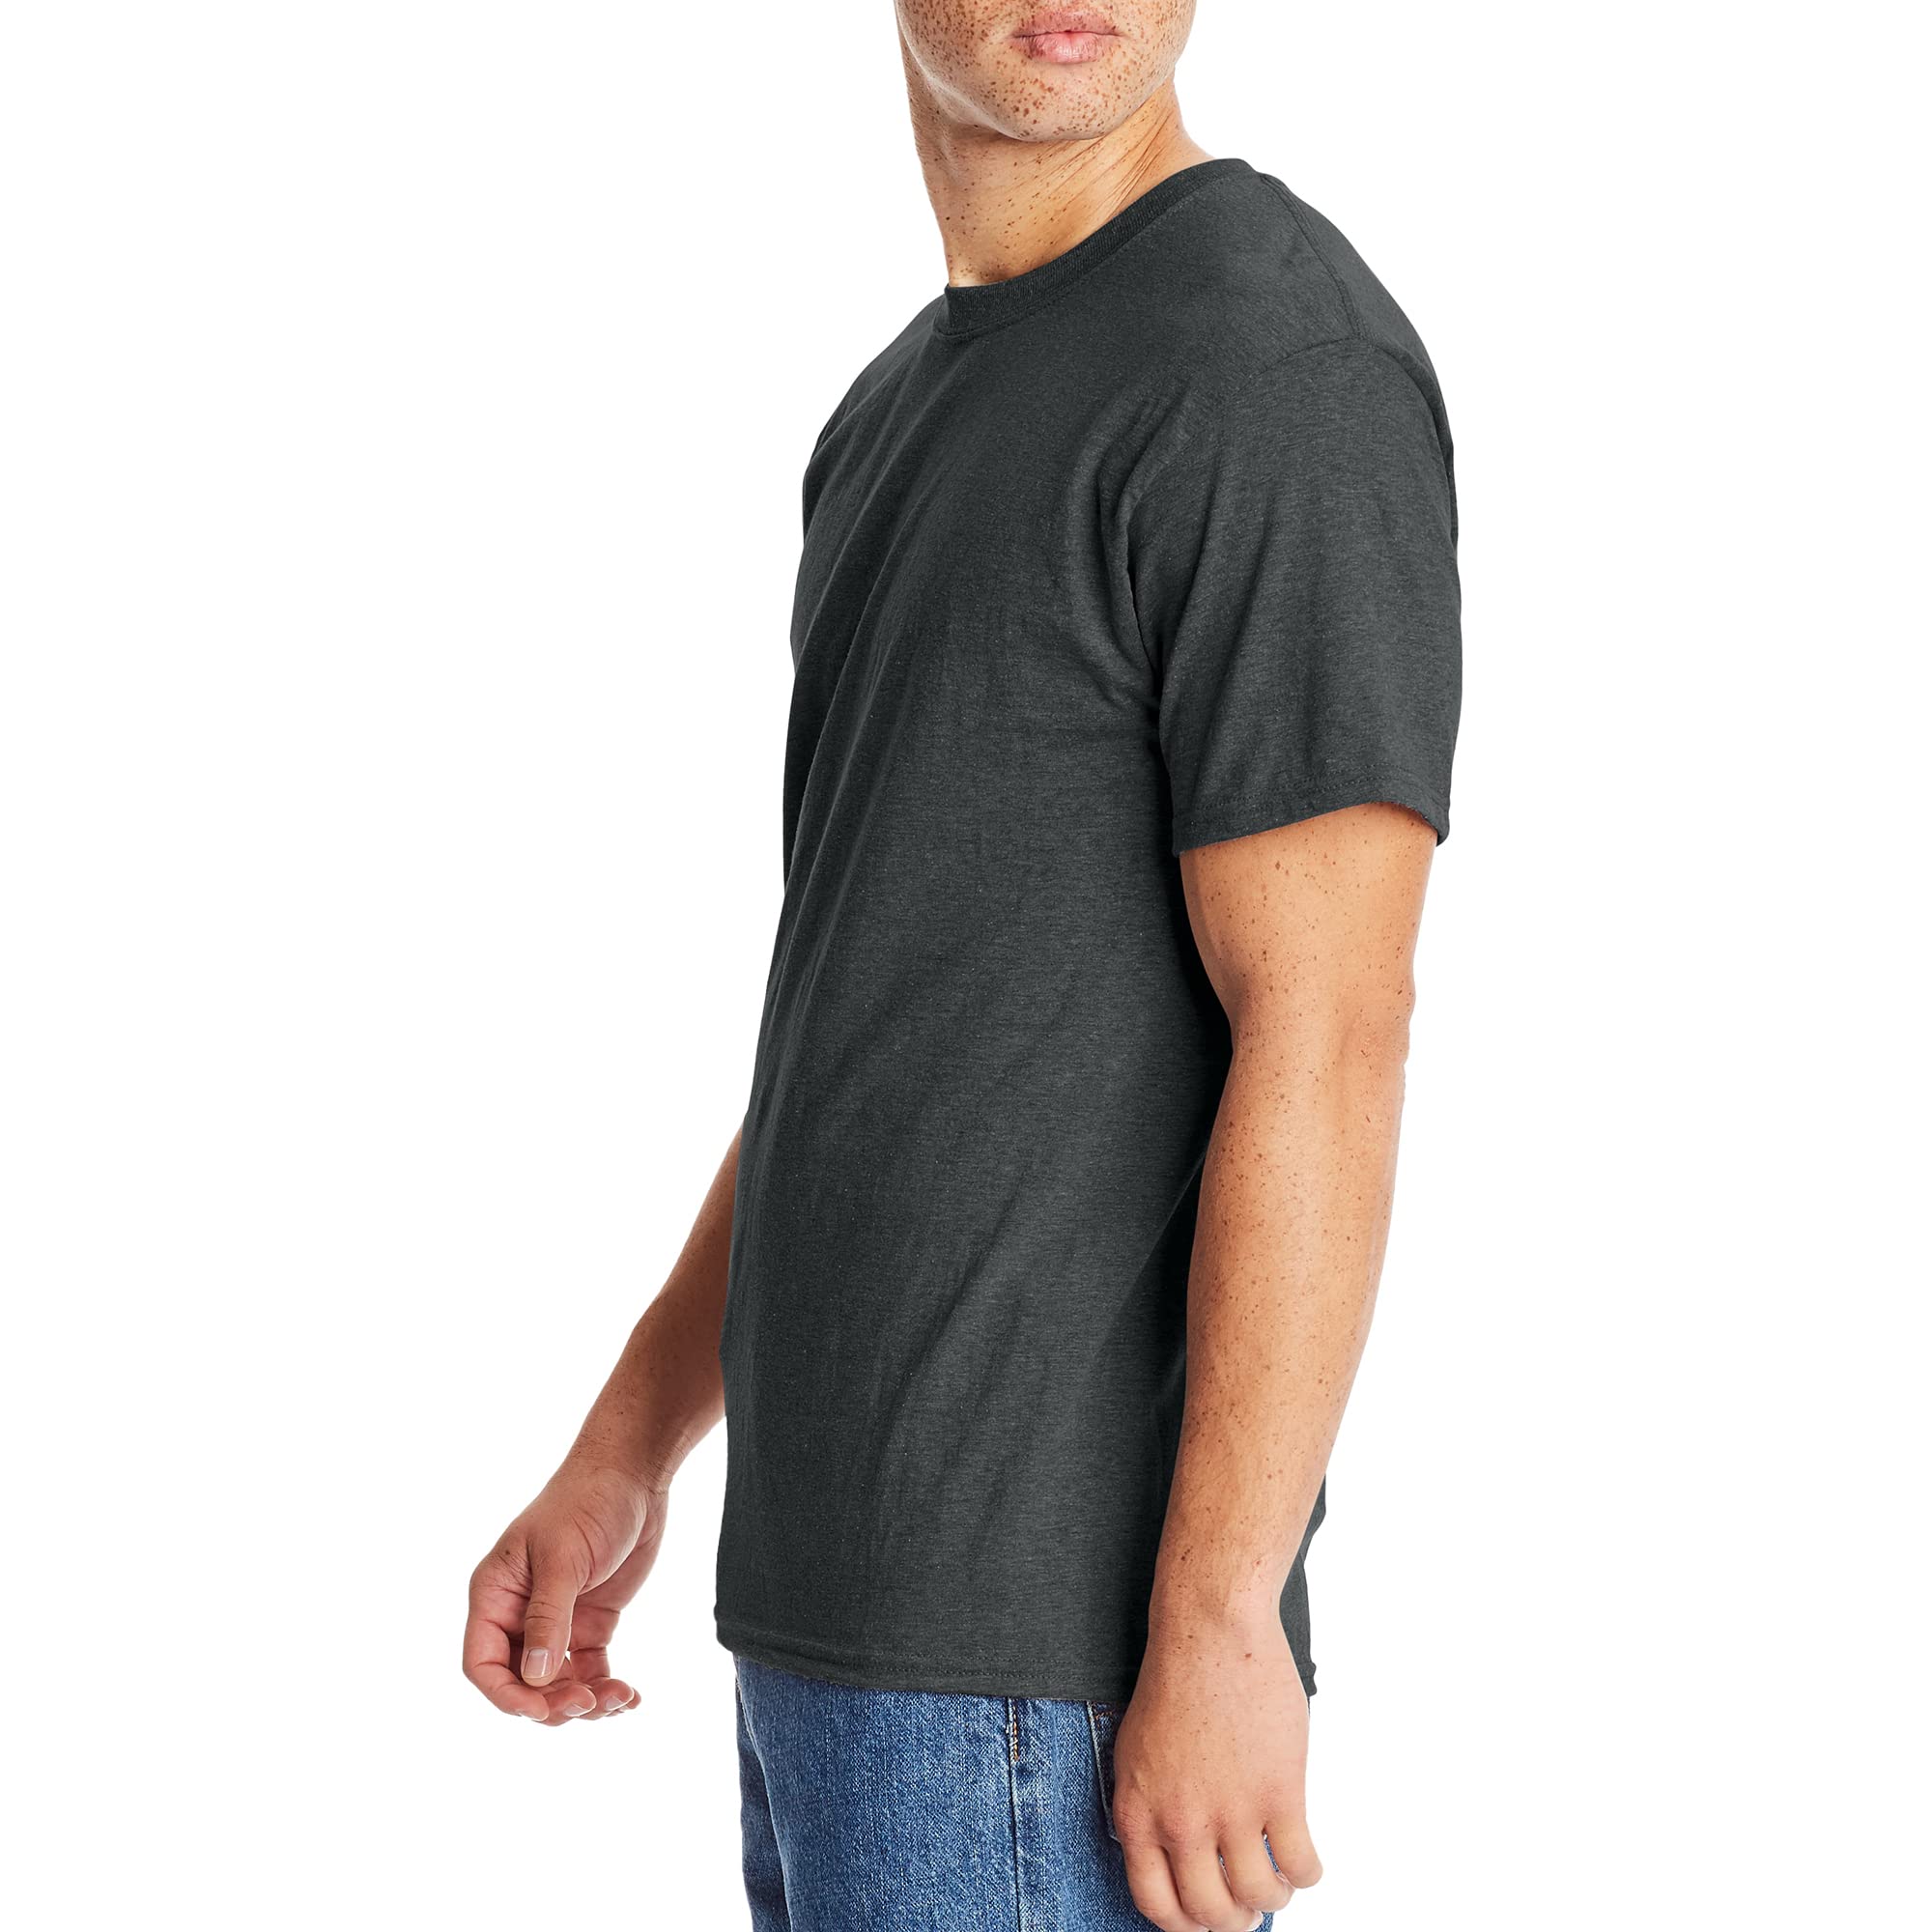 Hanes Mens Beefyt T-Shirt, Classic Heavyweight Cotton Crewneck Tee, Roomy Fit, 1 Or 2 Pack, Available in Tall